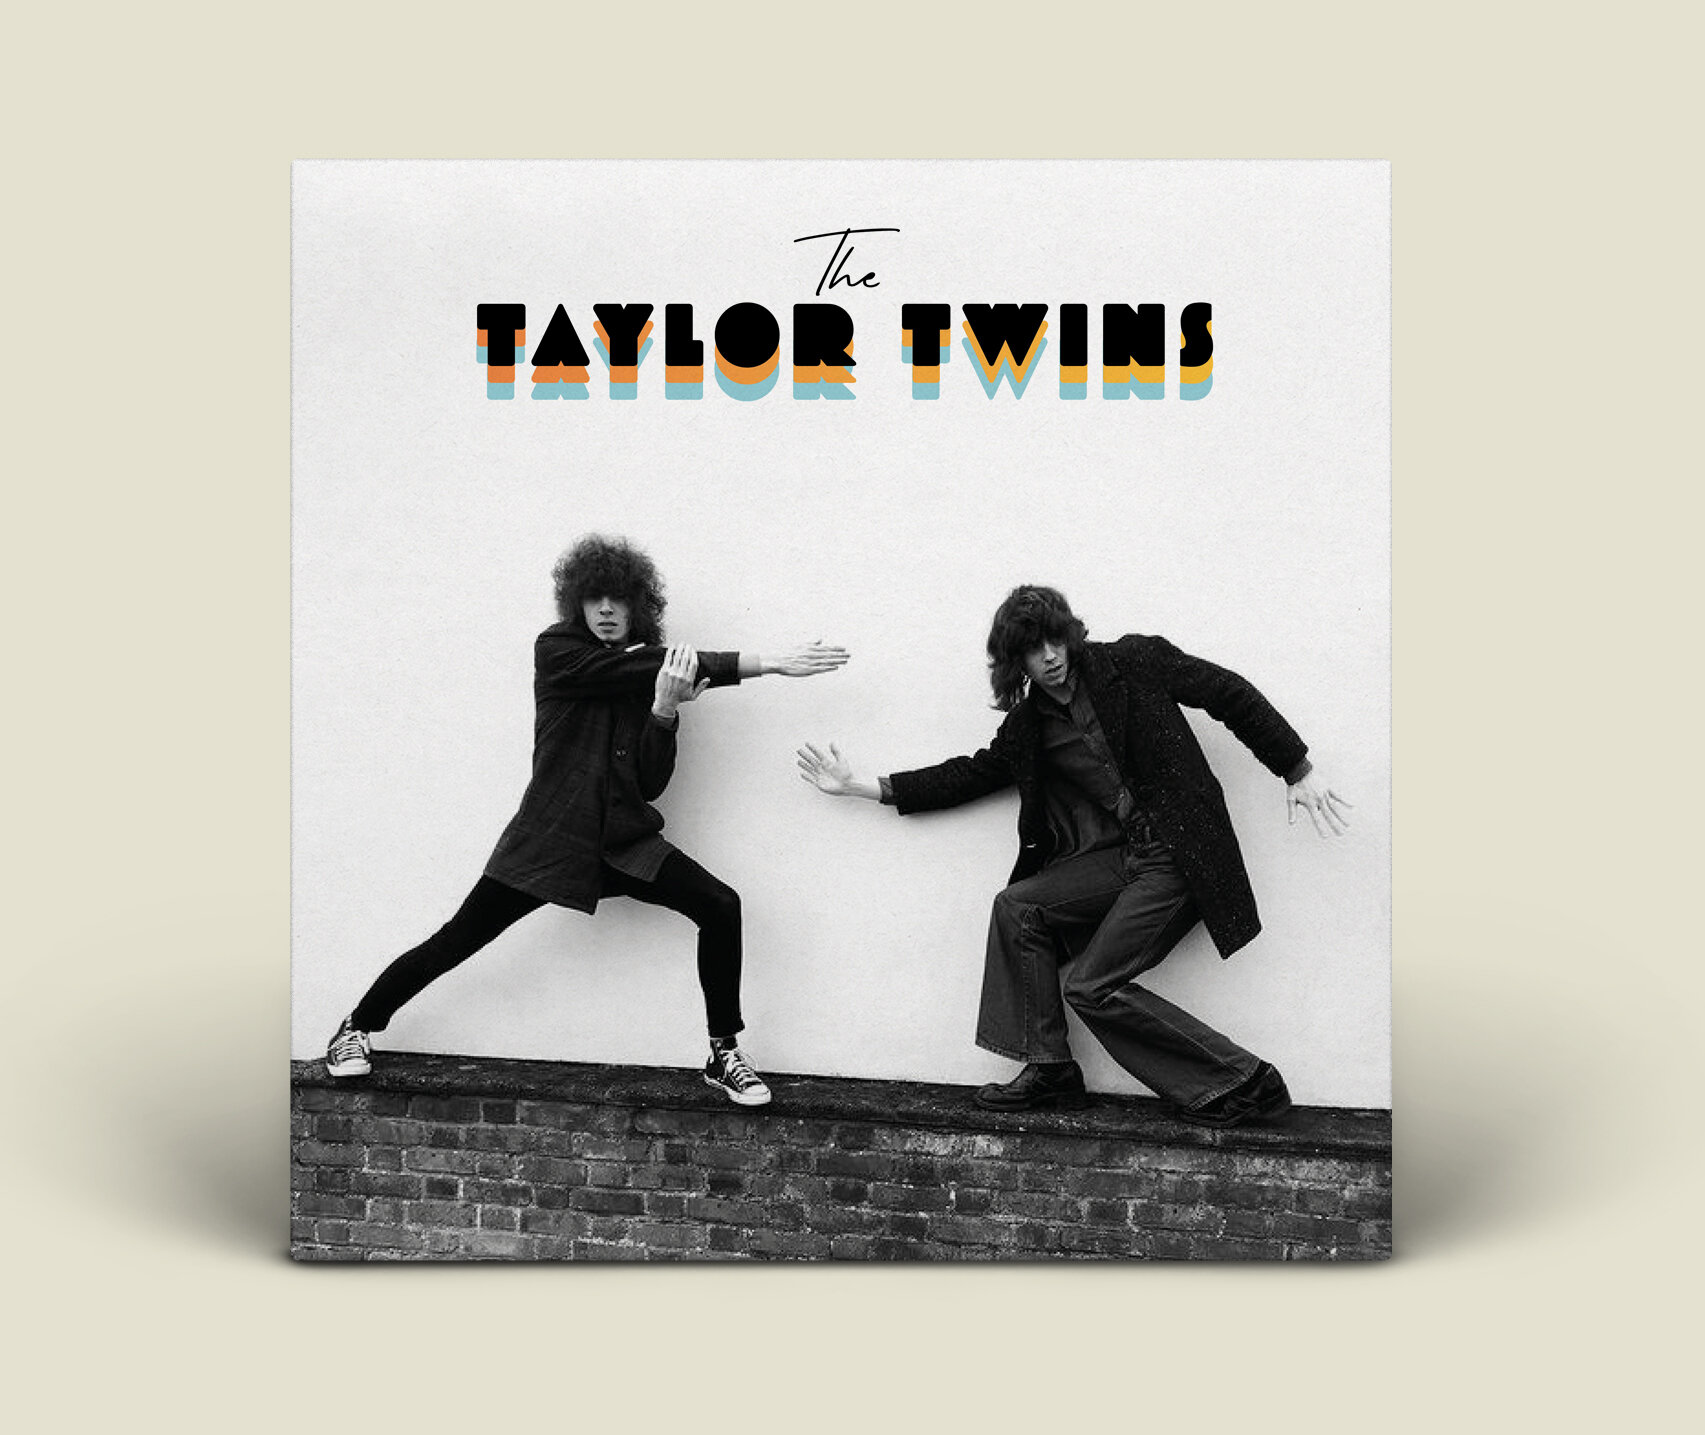 The Taylor Twins logo